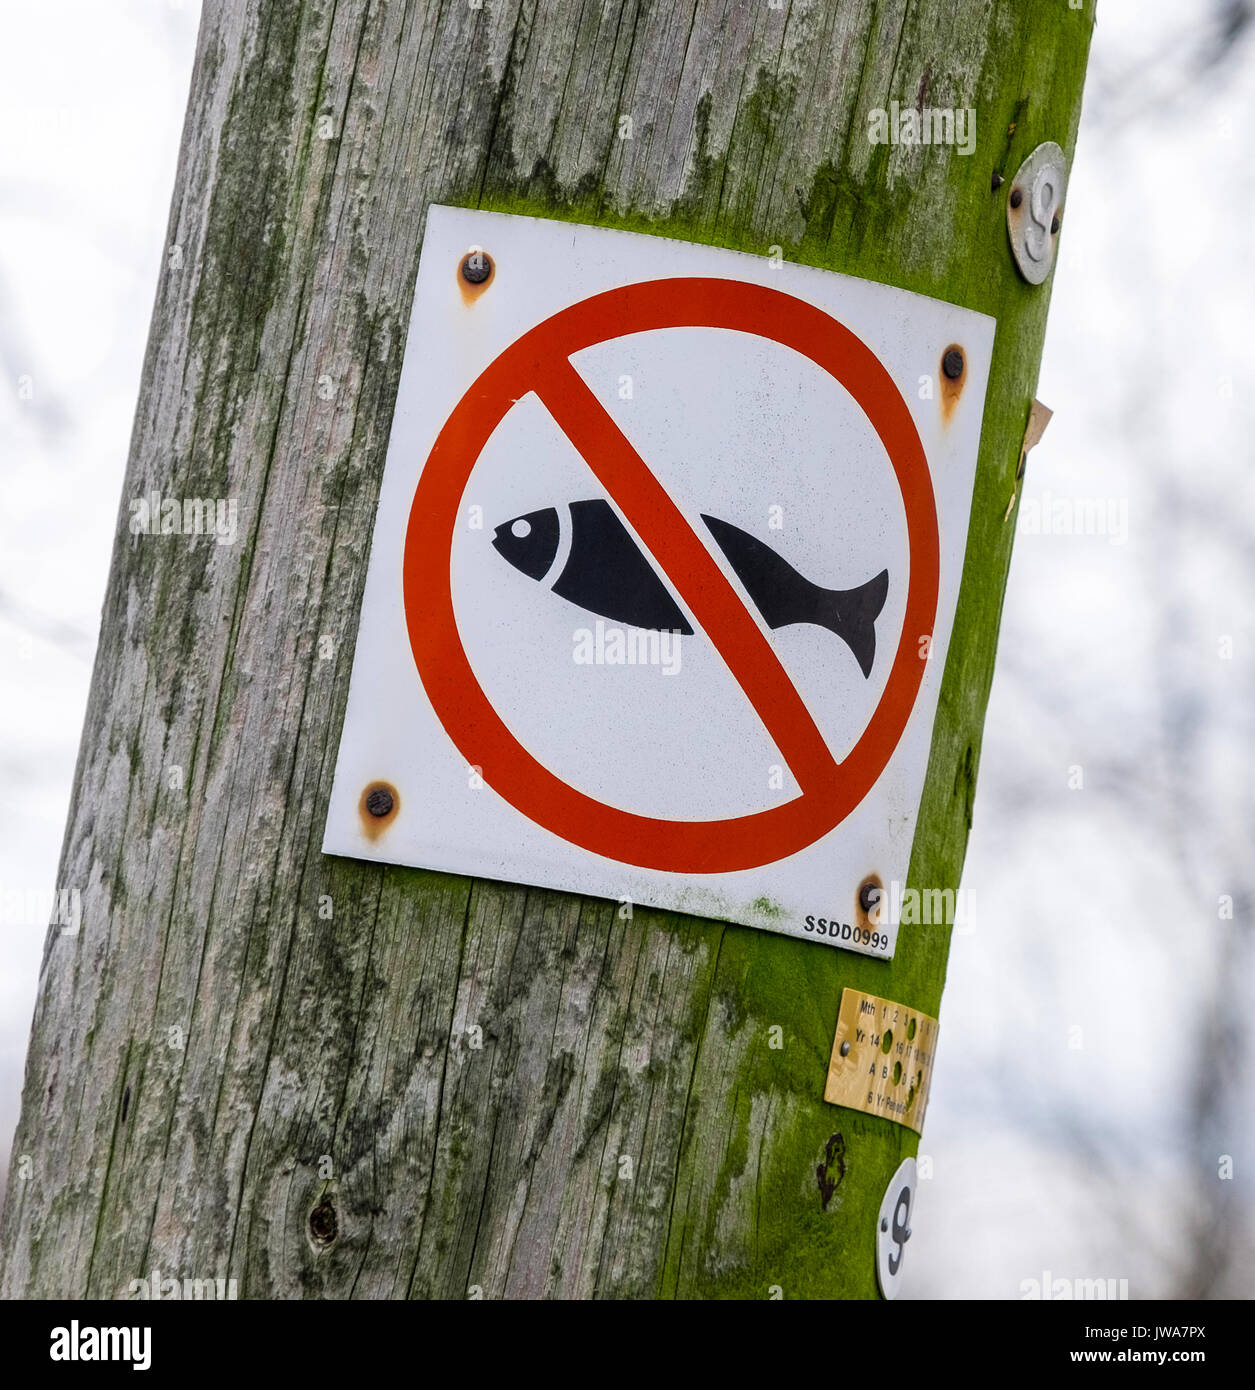 A no fishing sign - a fish with a red line through it Stock Photo